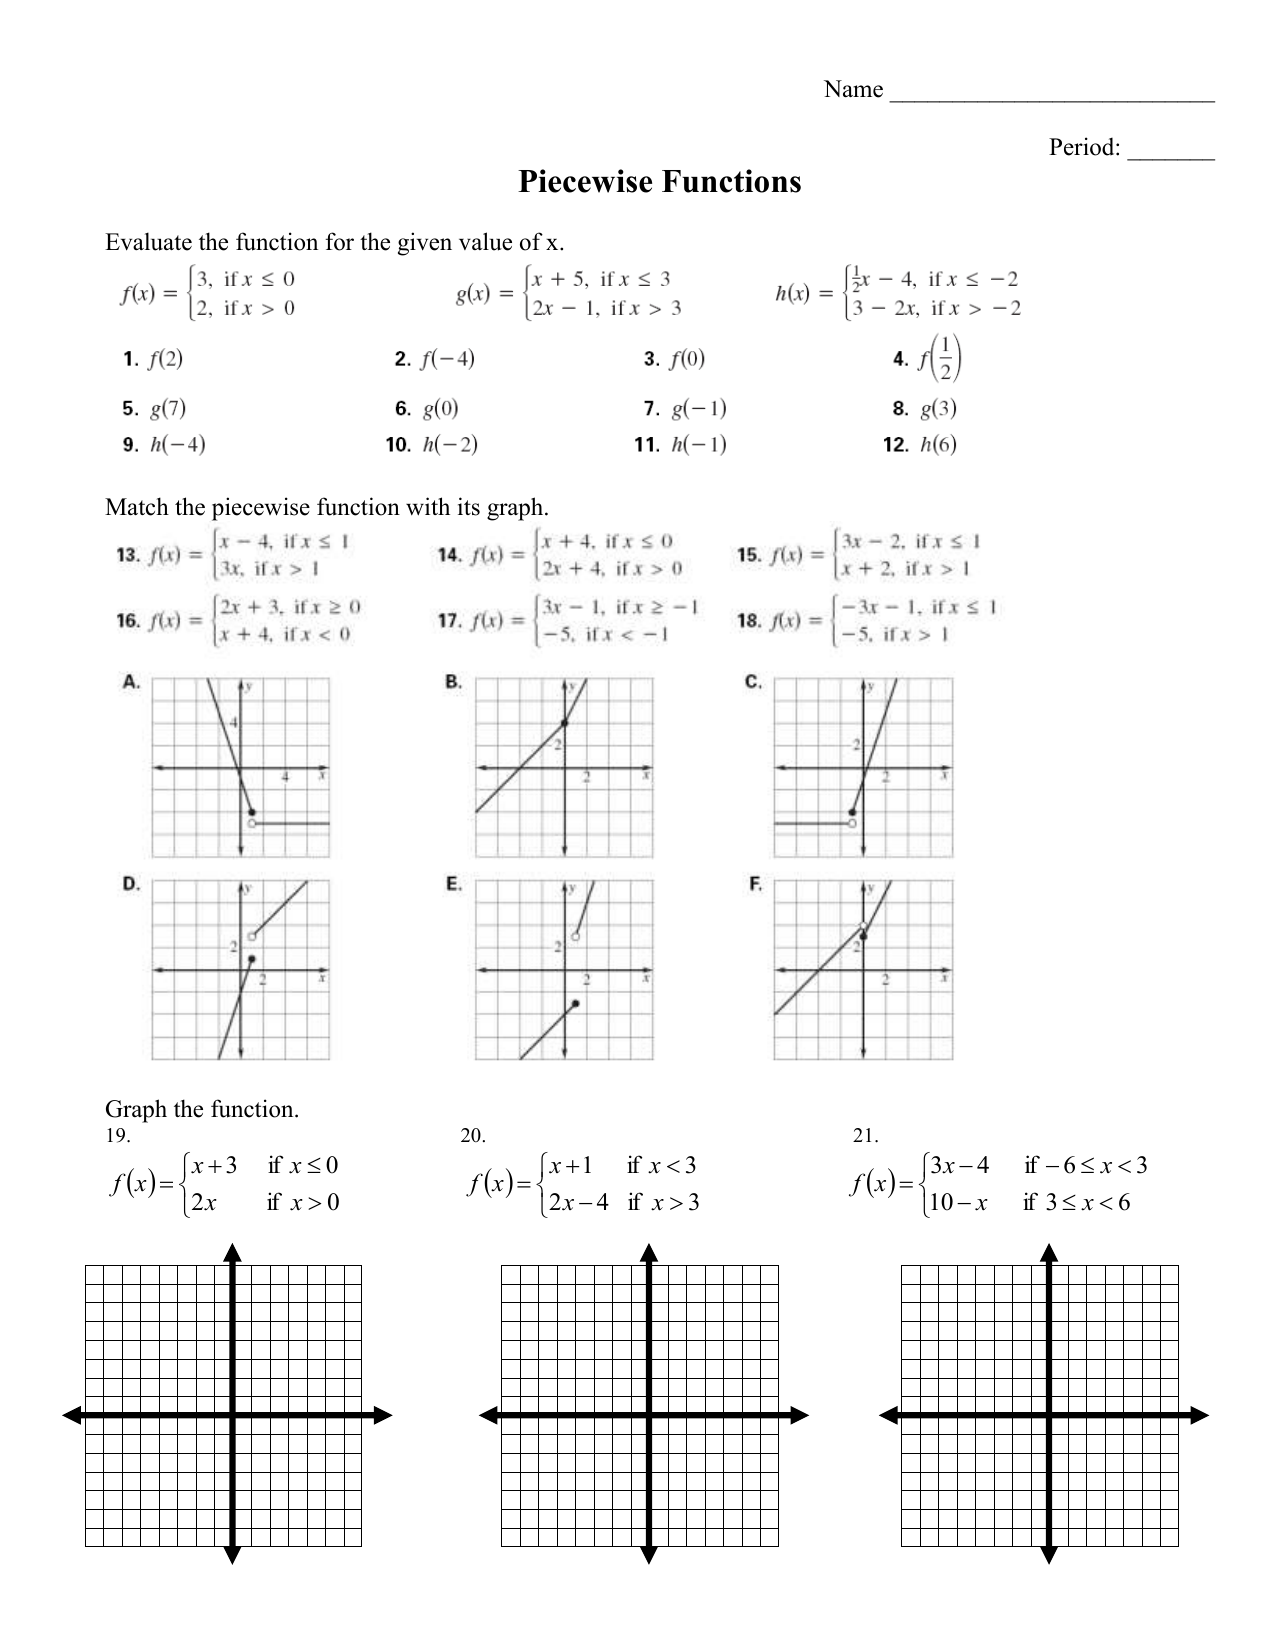 graphing-piecewise-functions-worksheet